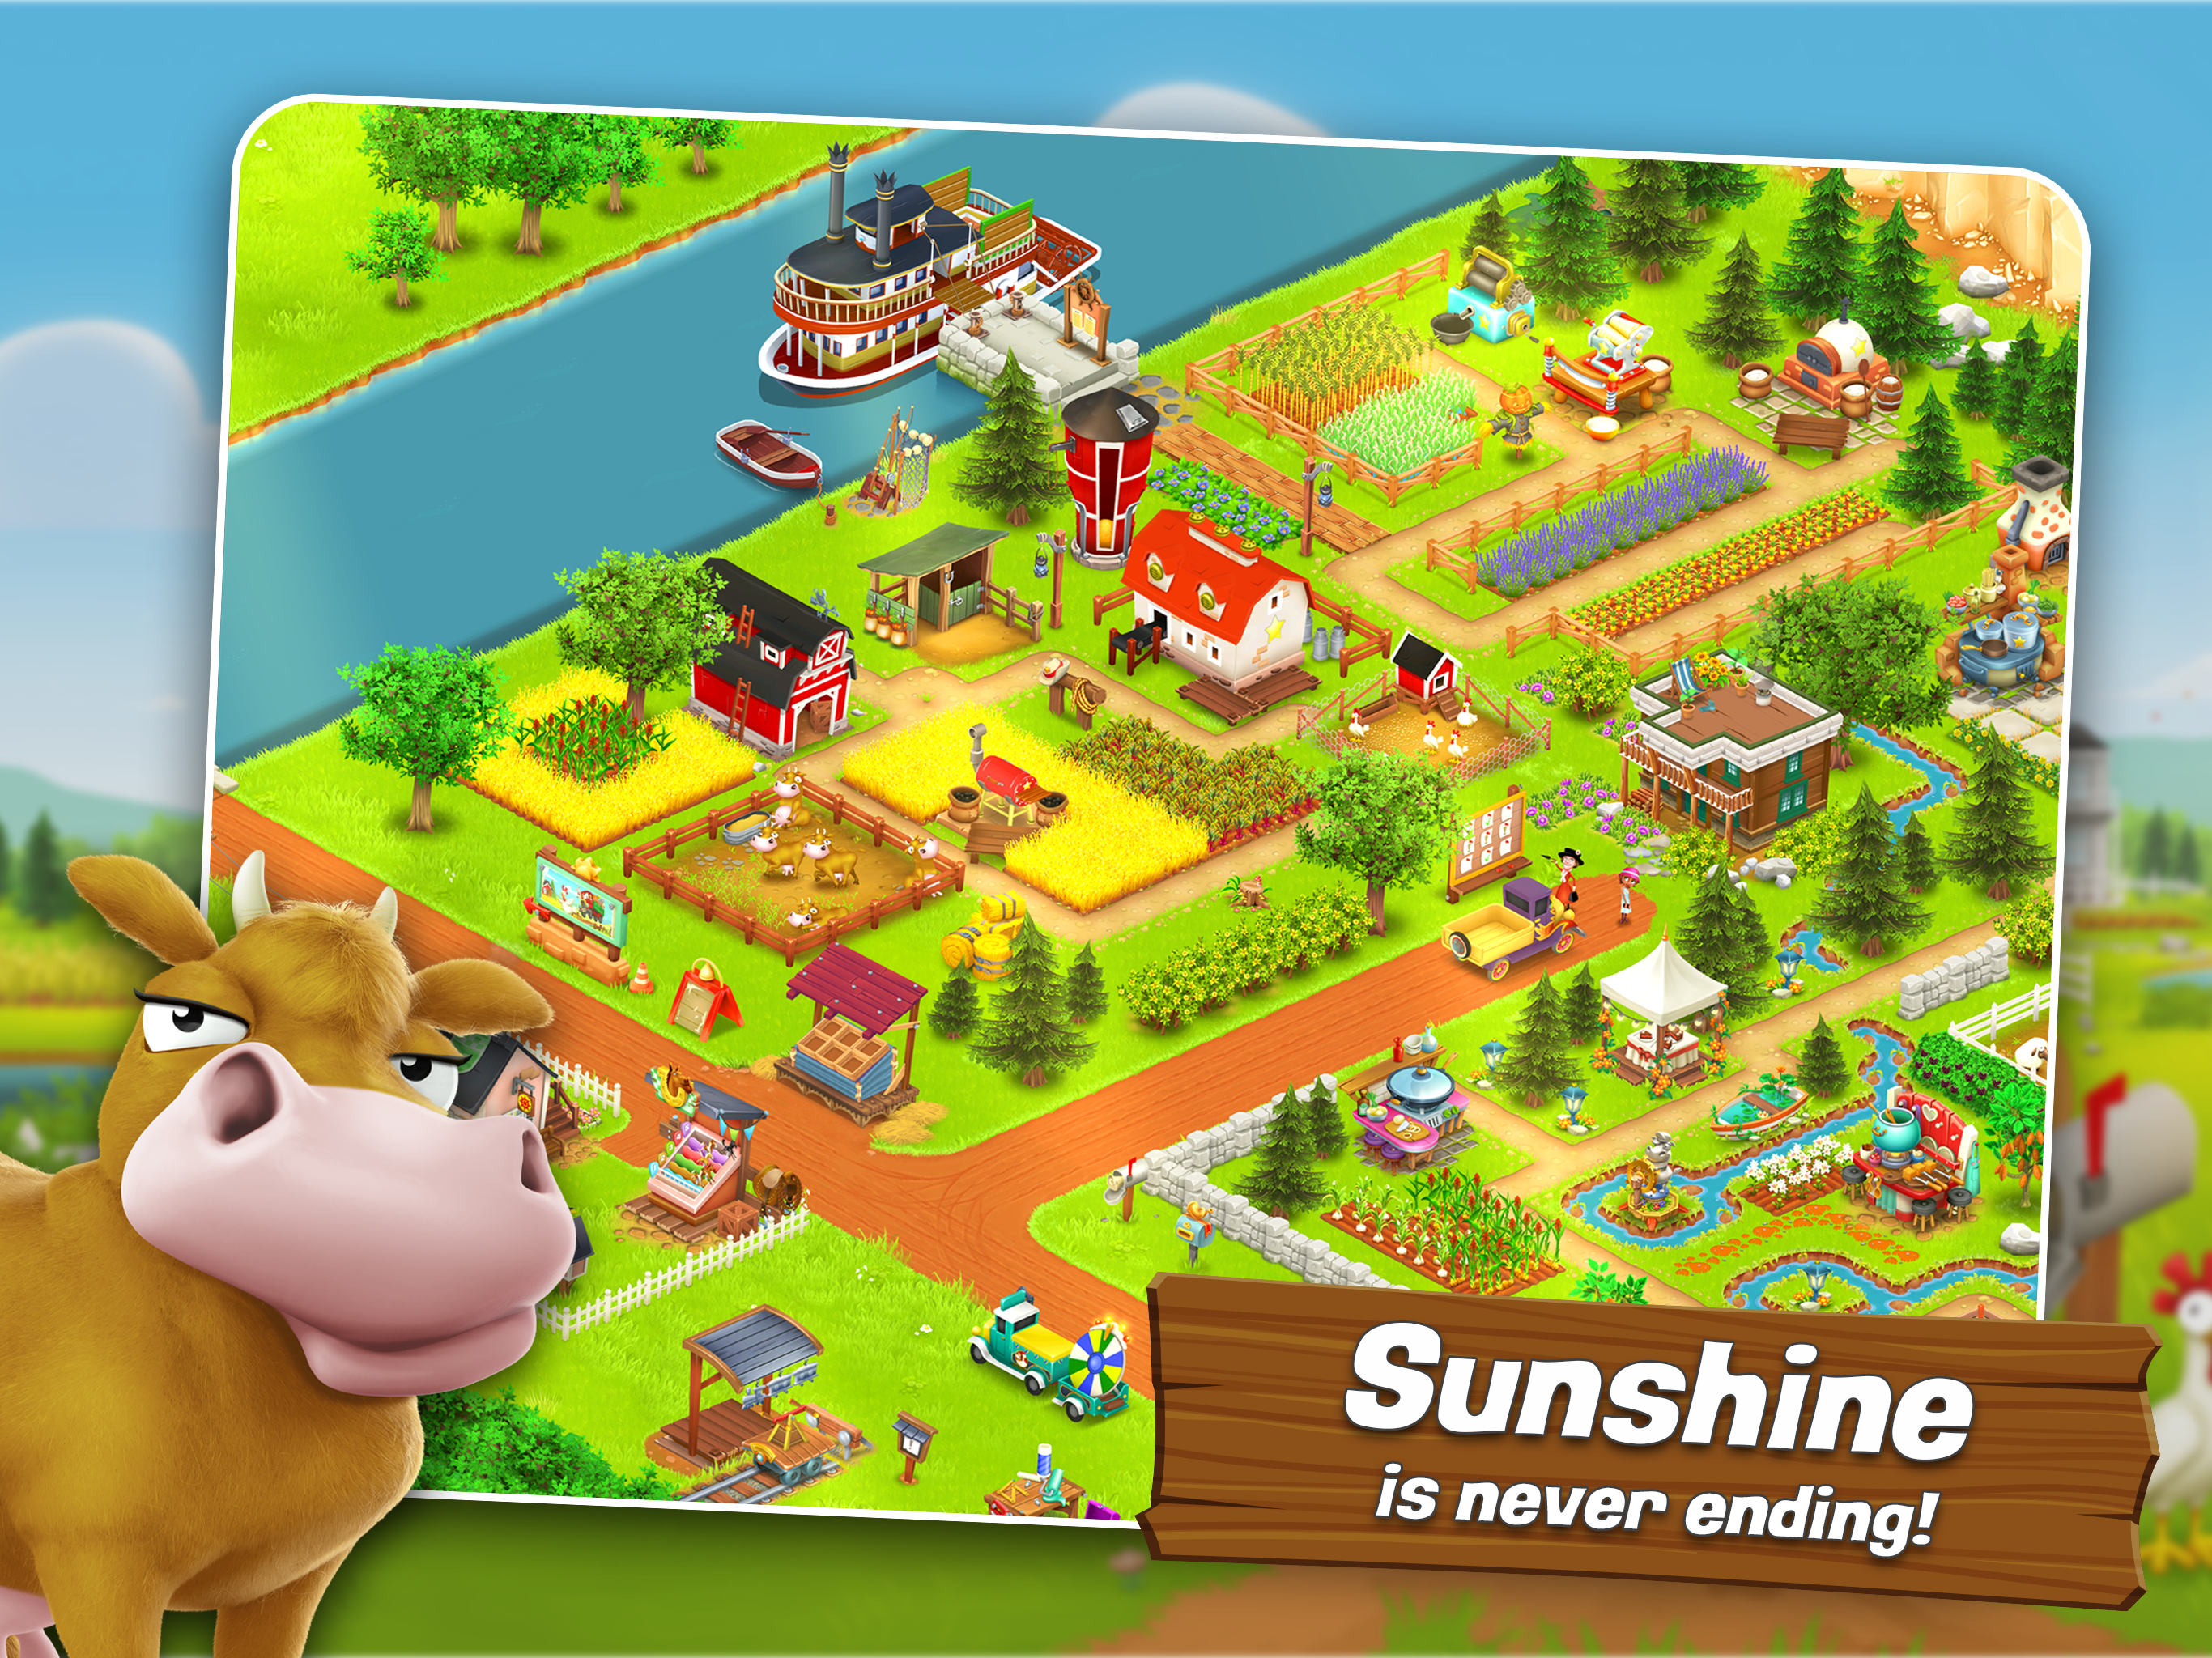 Game Addictions - My Addiction to Hay Day - HubPages